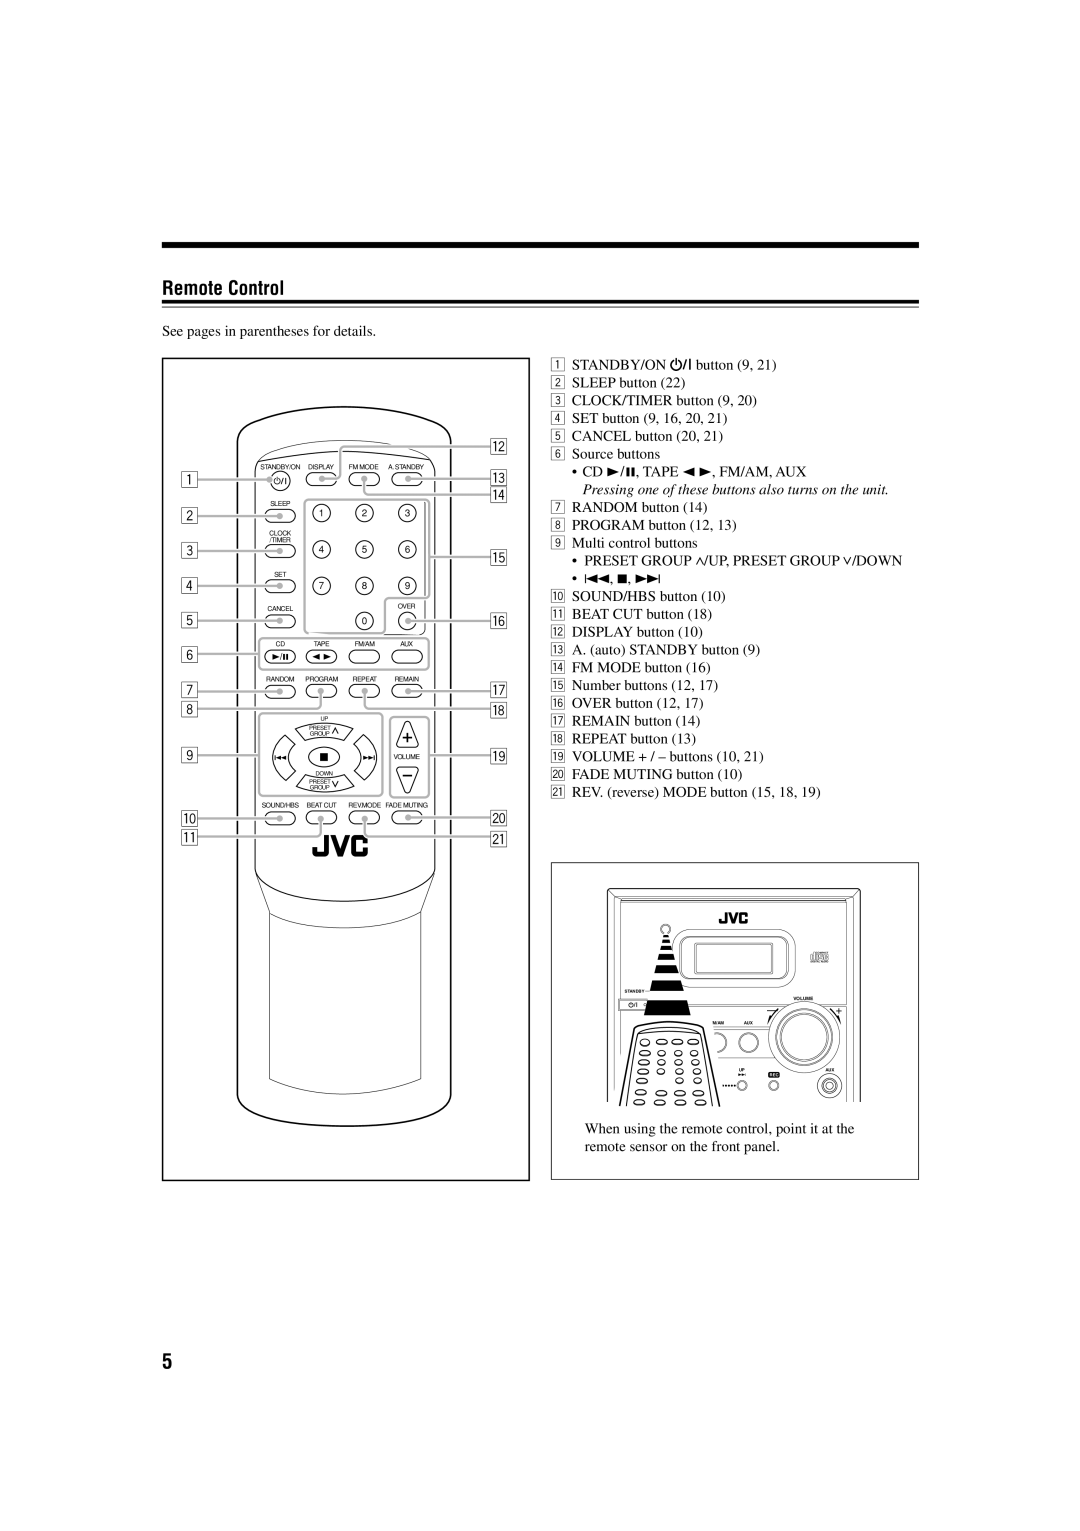 JVC UX-H300 manual Remote Control, Standby/On Display 